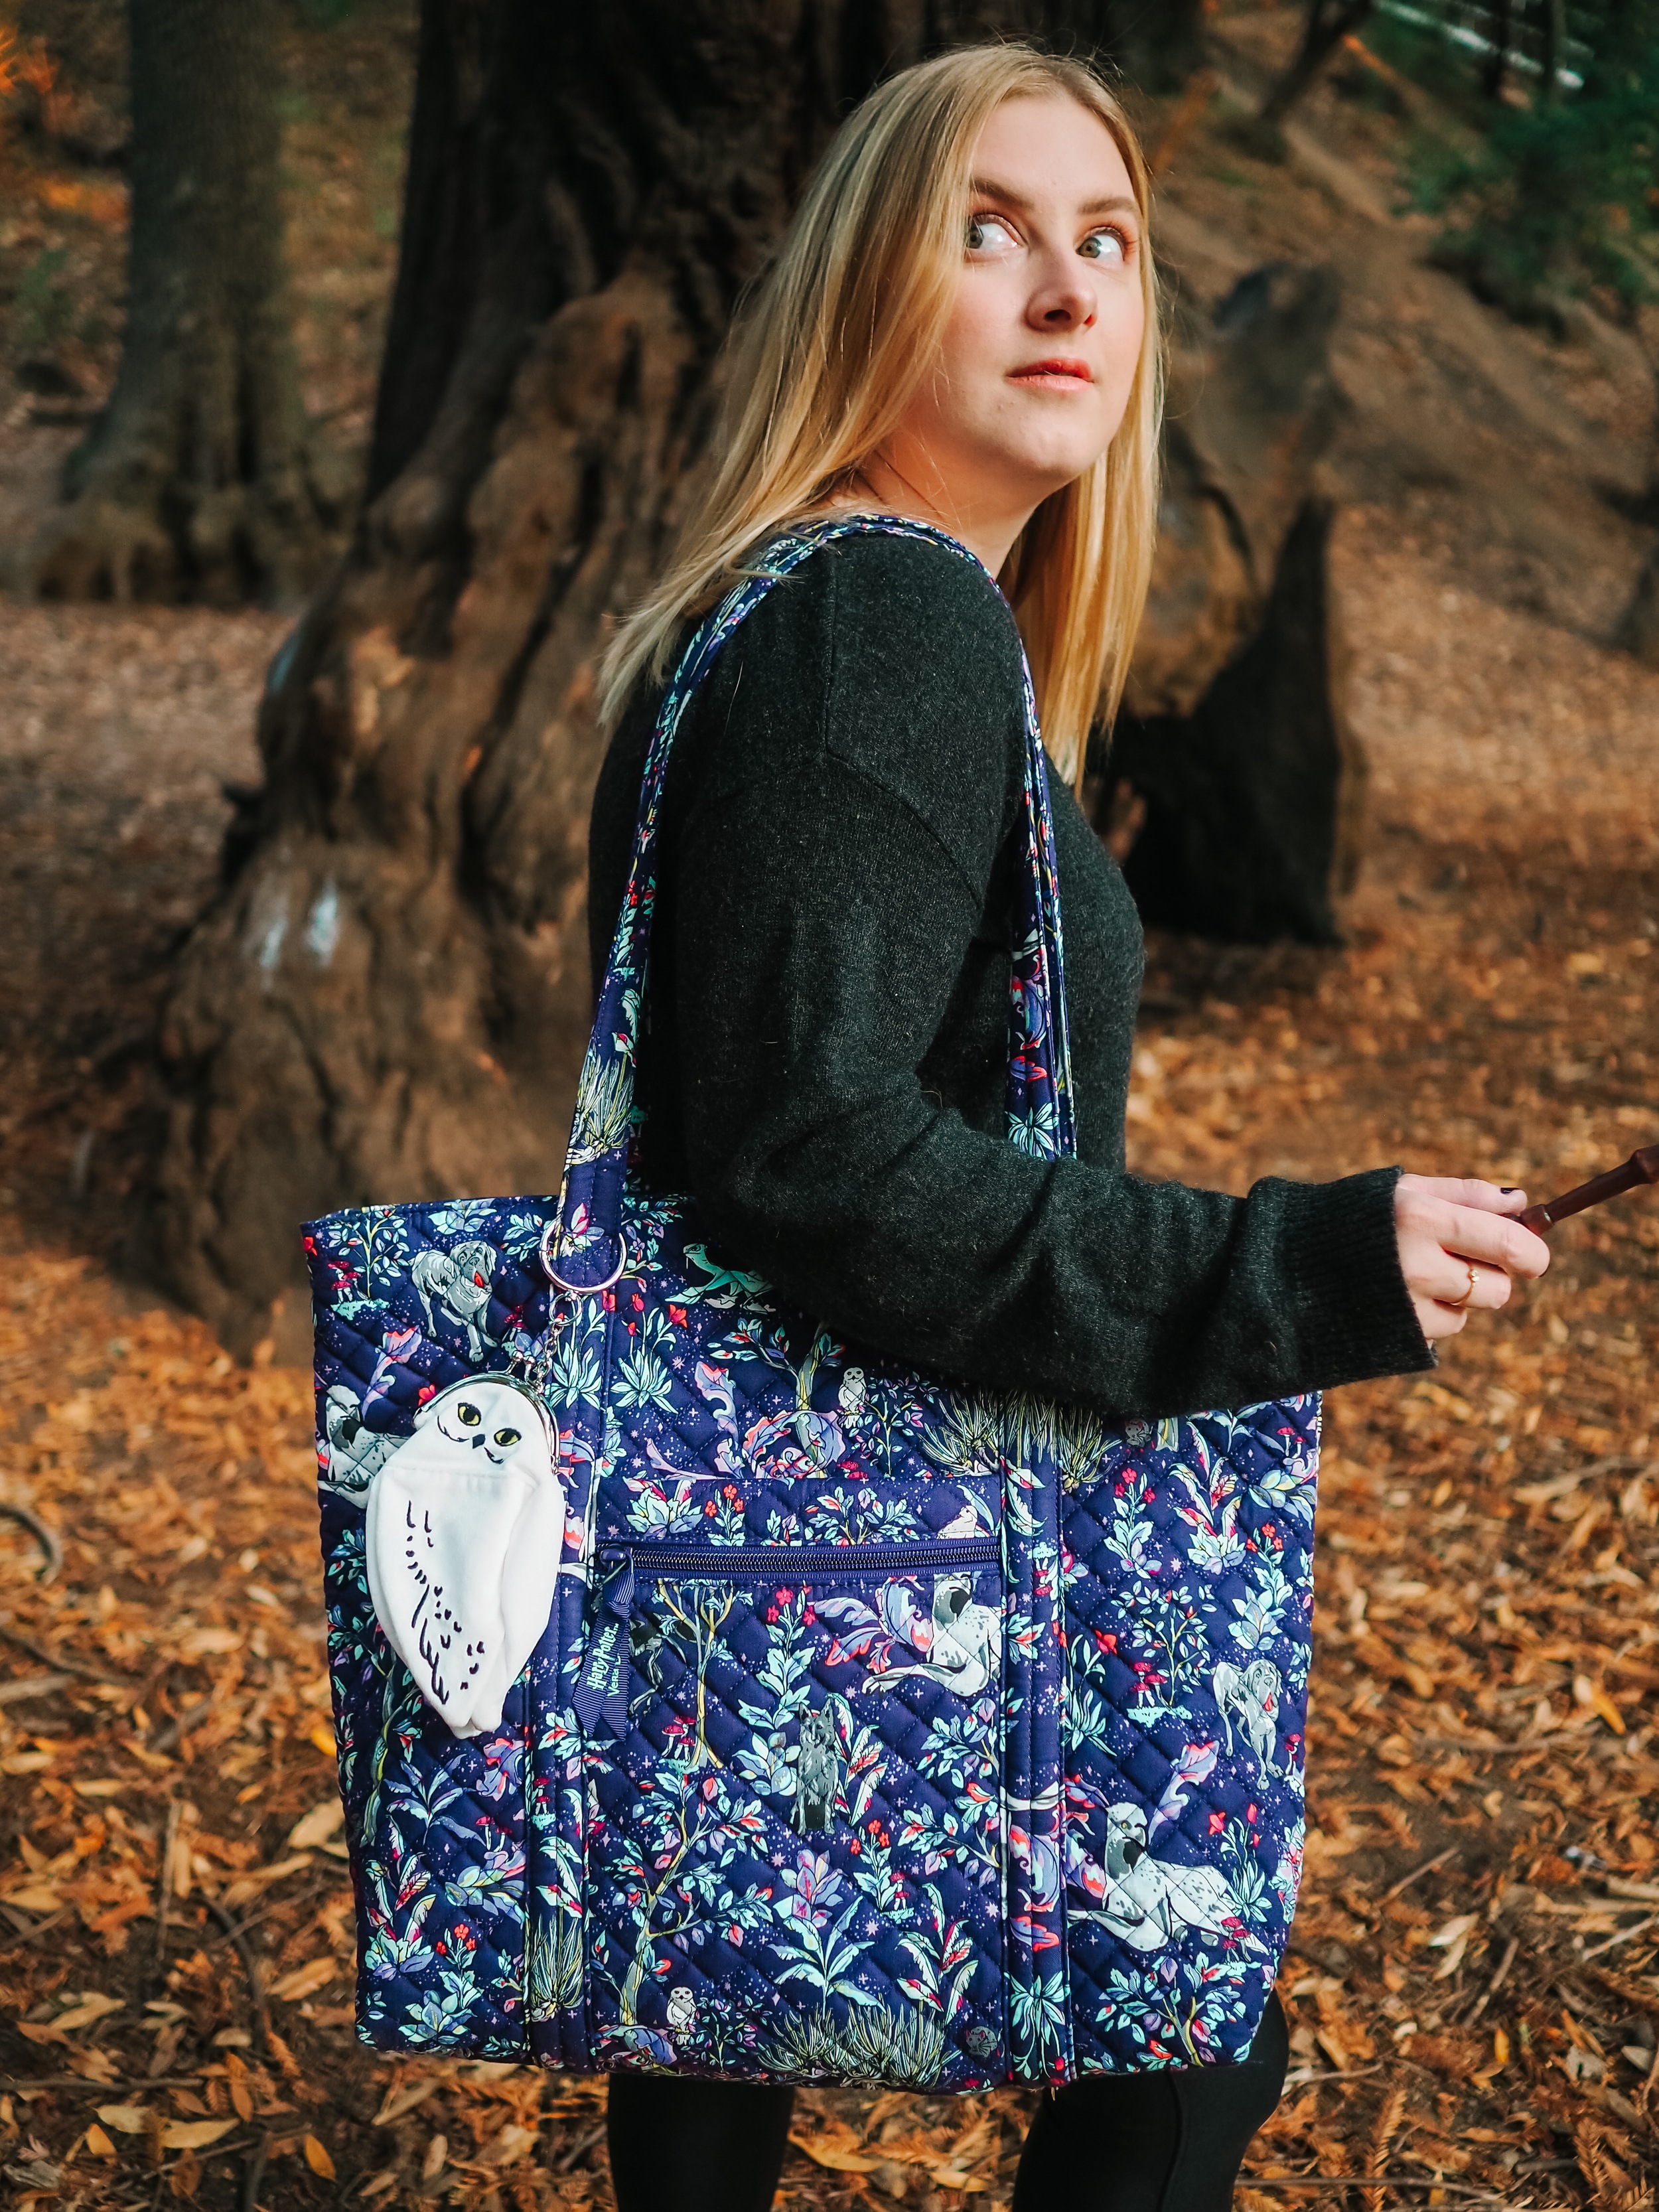 Kelsey from Blondes & Bagels showcases the new Forbidden Forest inspired Vera Bradley Harry Potter collection, packed with magical creatures.